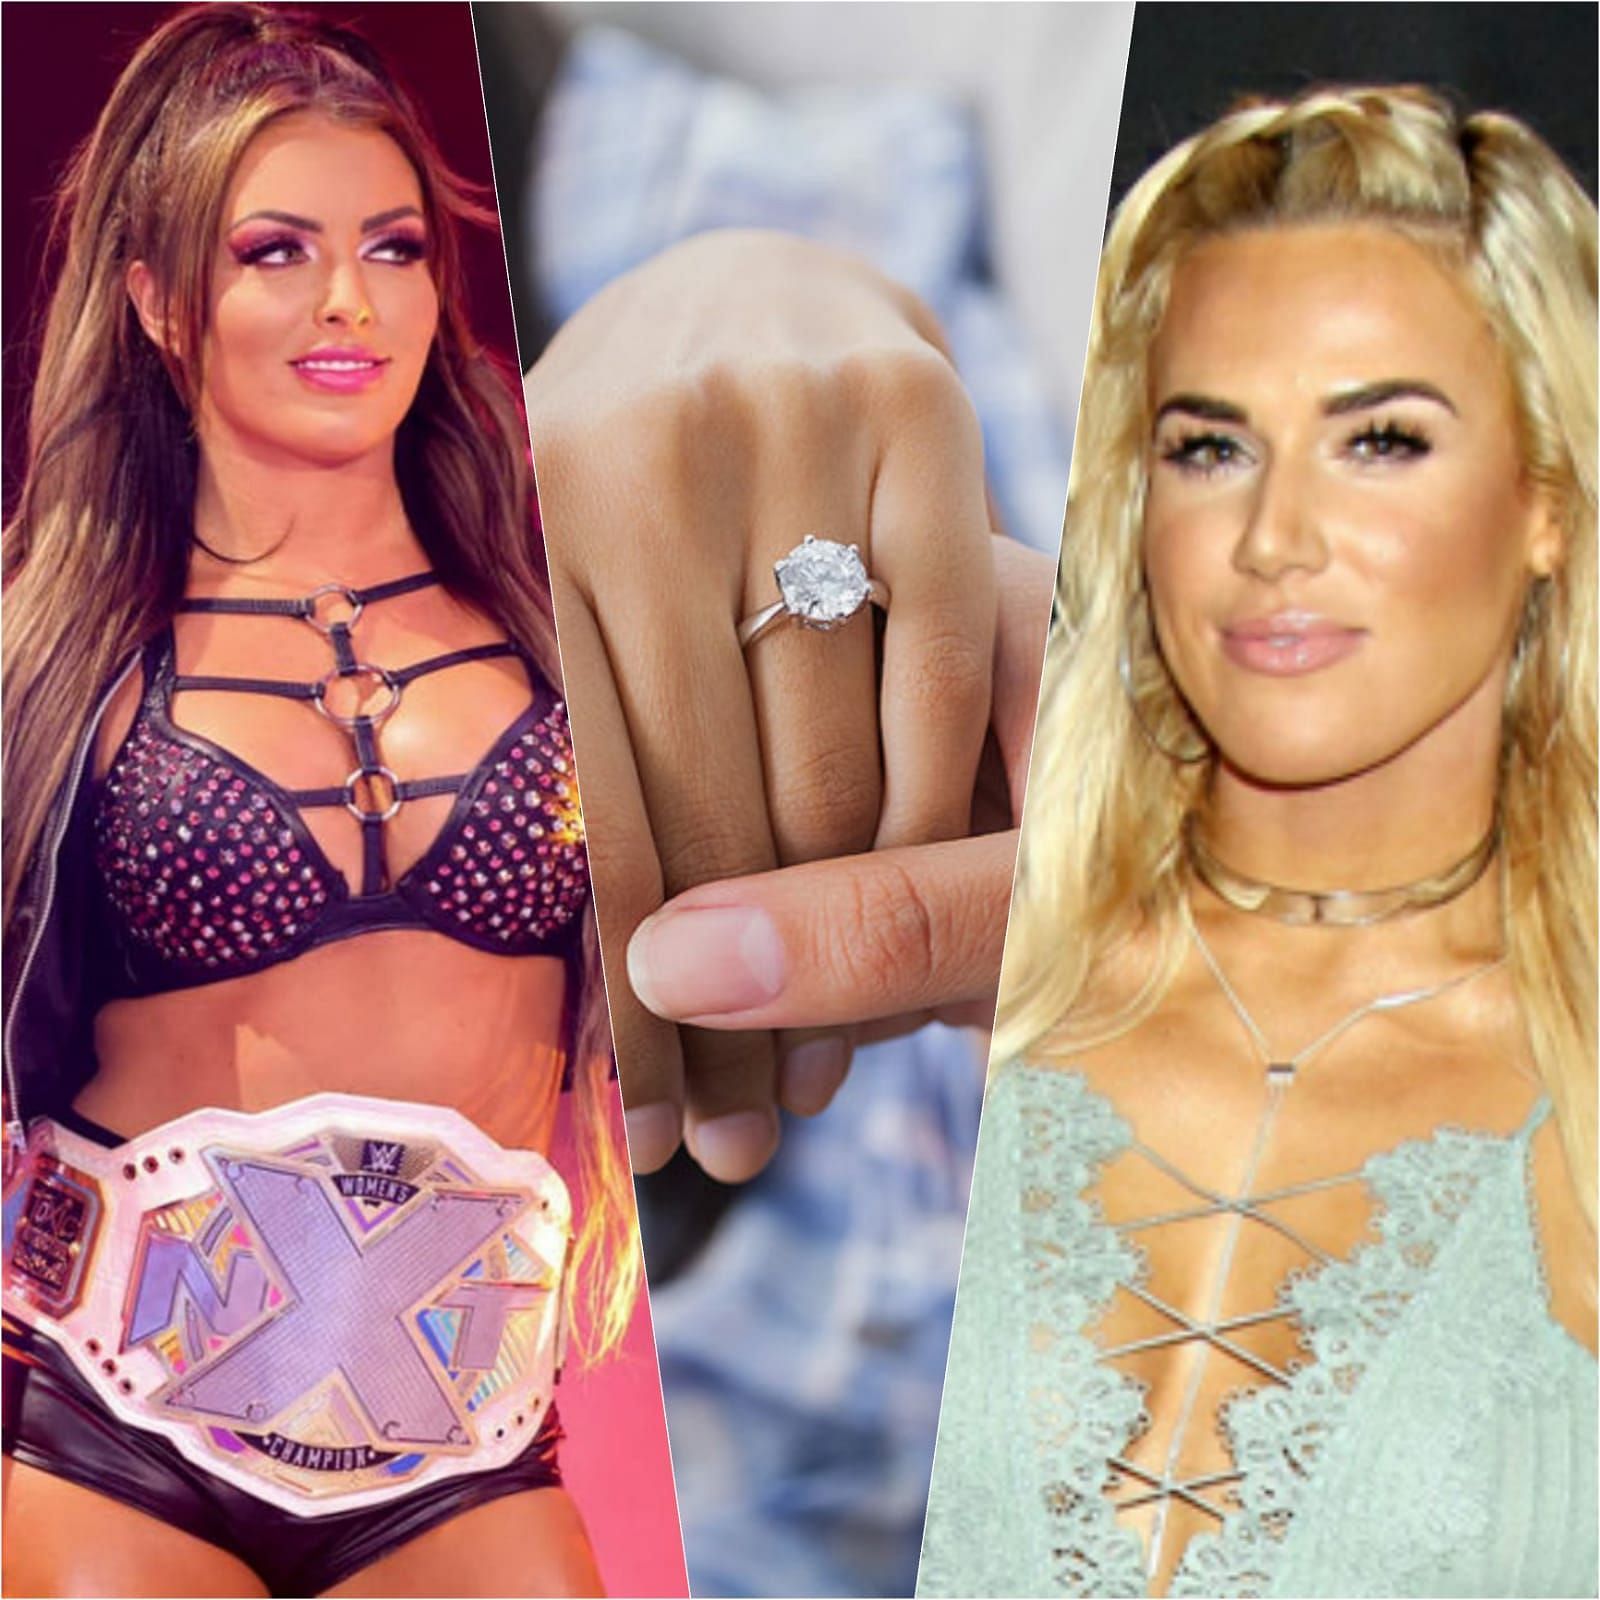 Mandy Rose and Lana are former WWE stars!